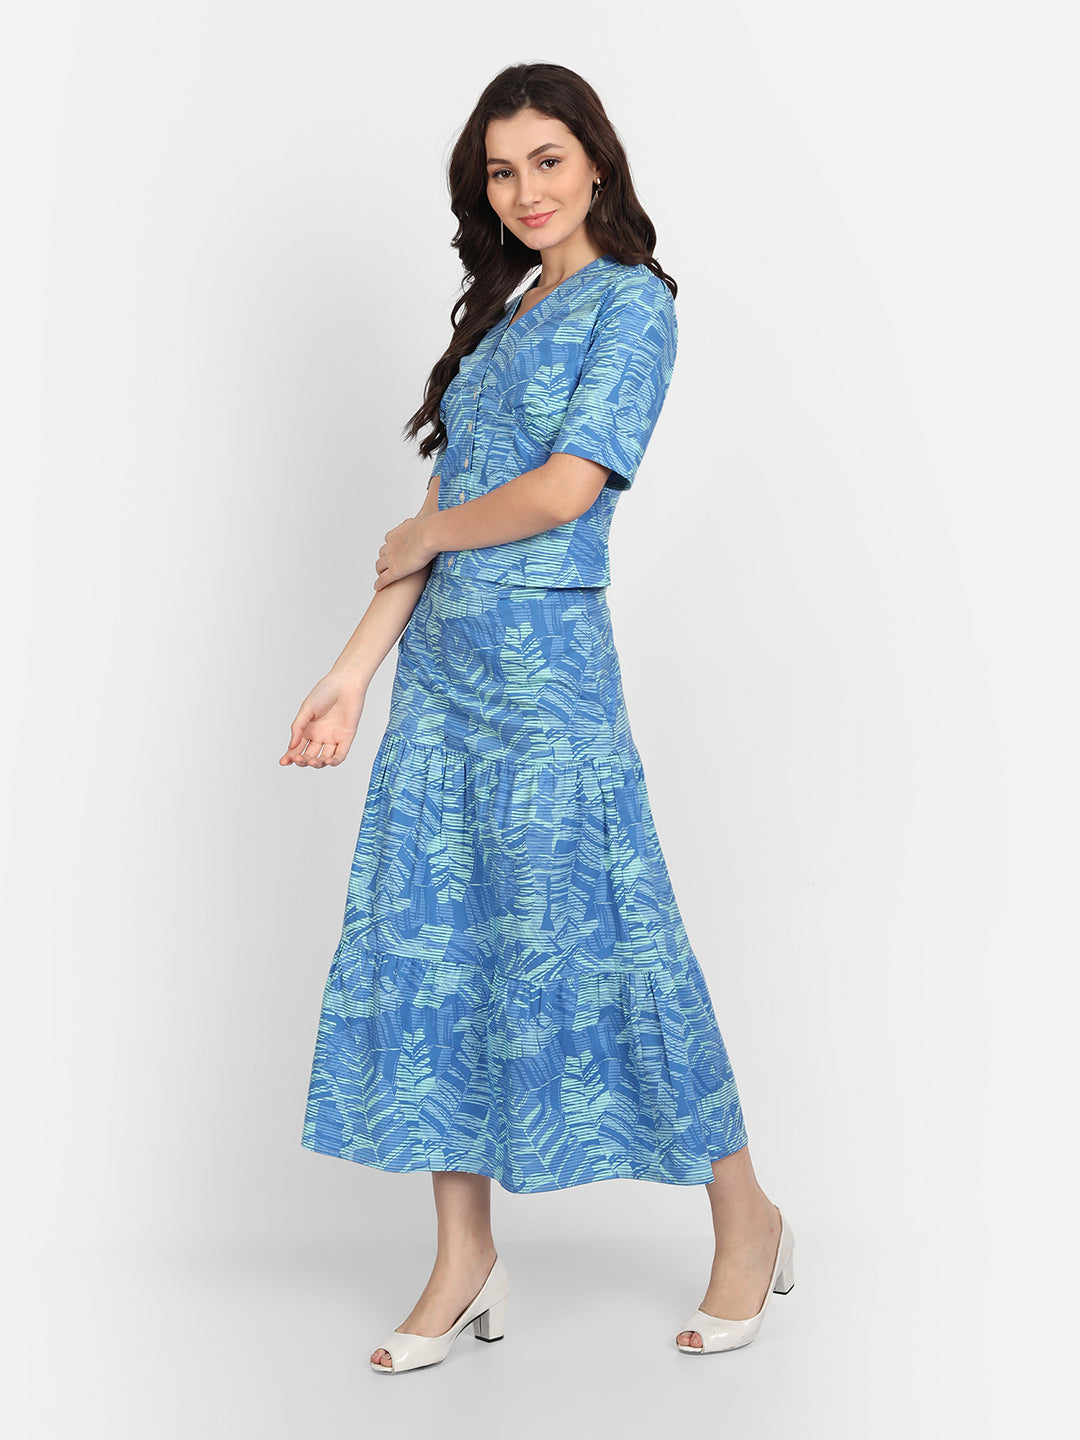 Women Printed Short Sleeves Top and Skirt Co-Ords